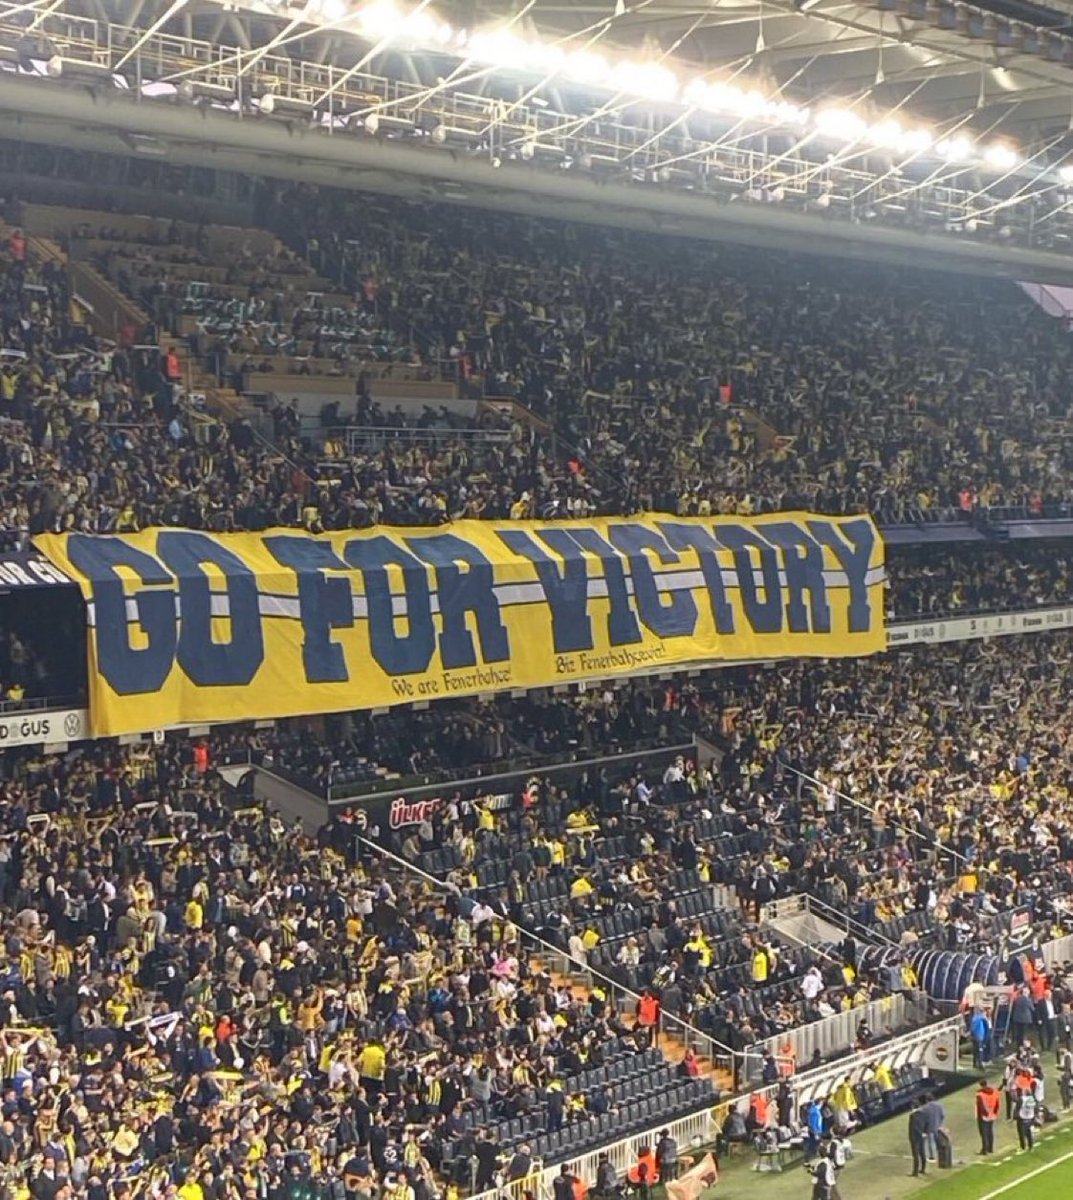 We will never give up! #Fenerbahçe